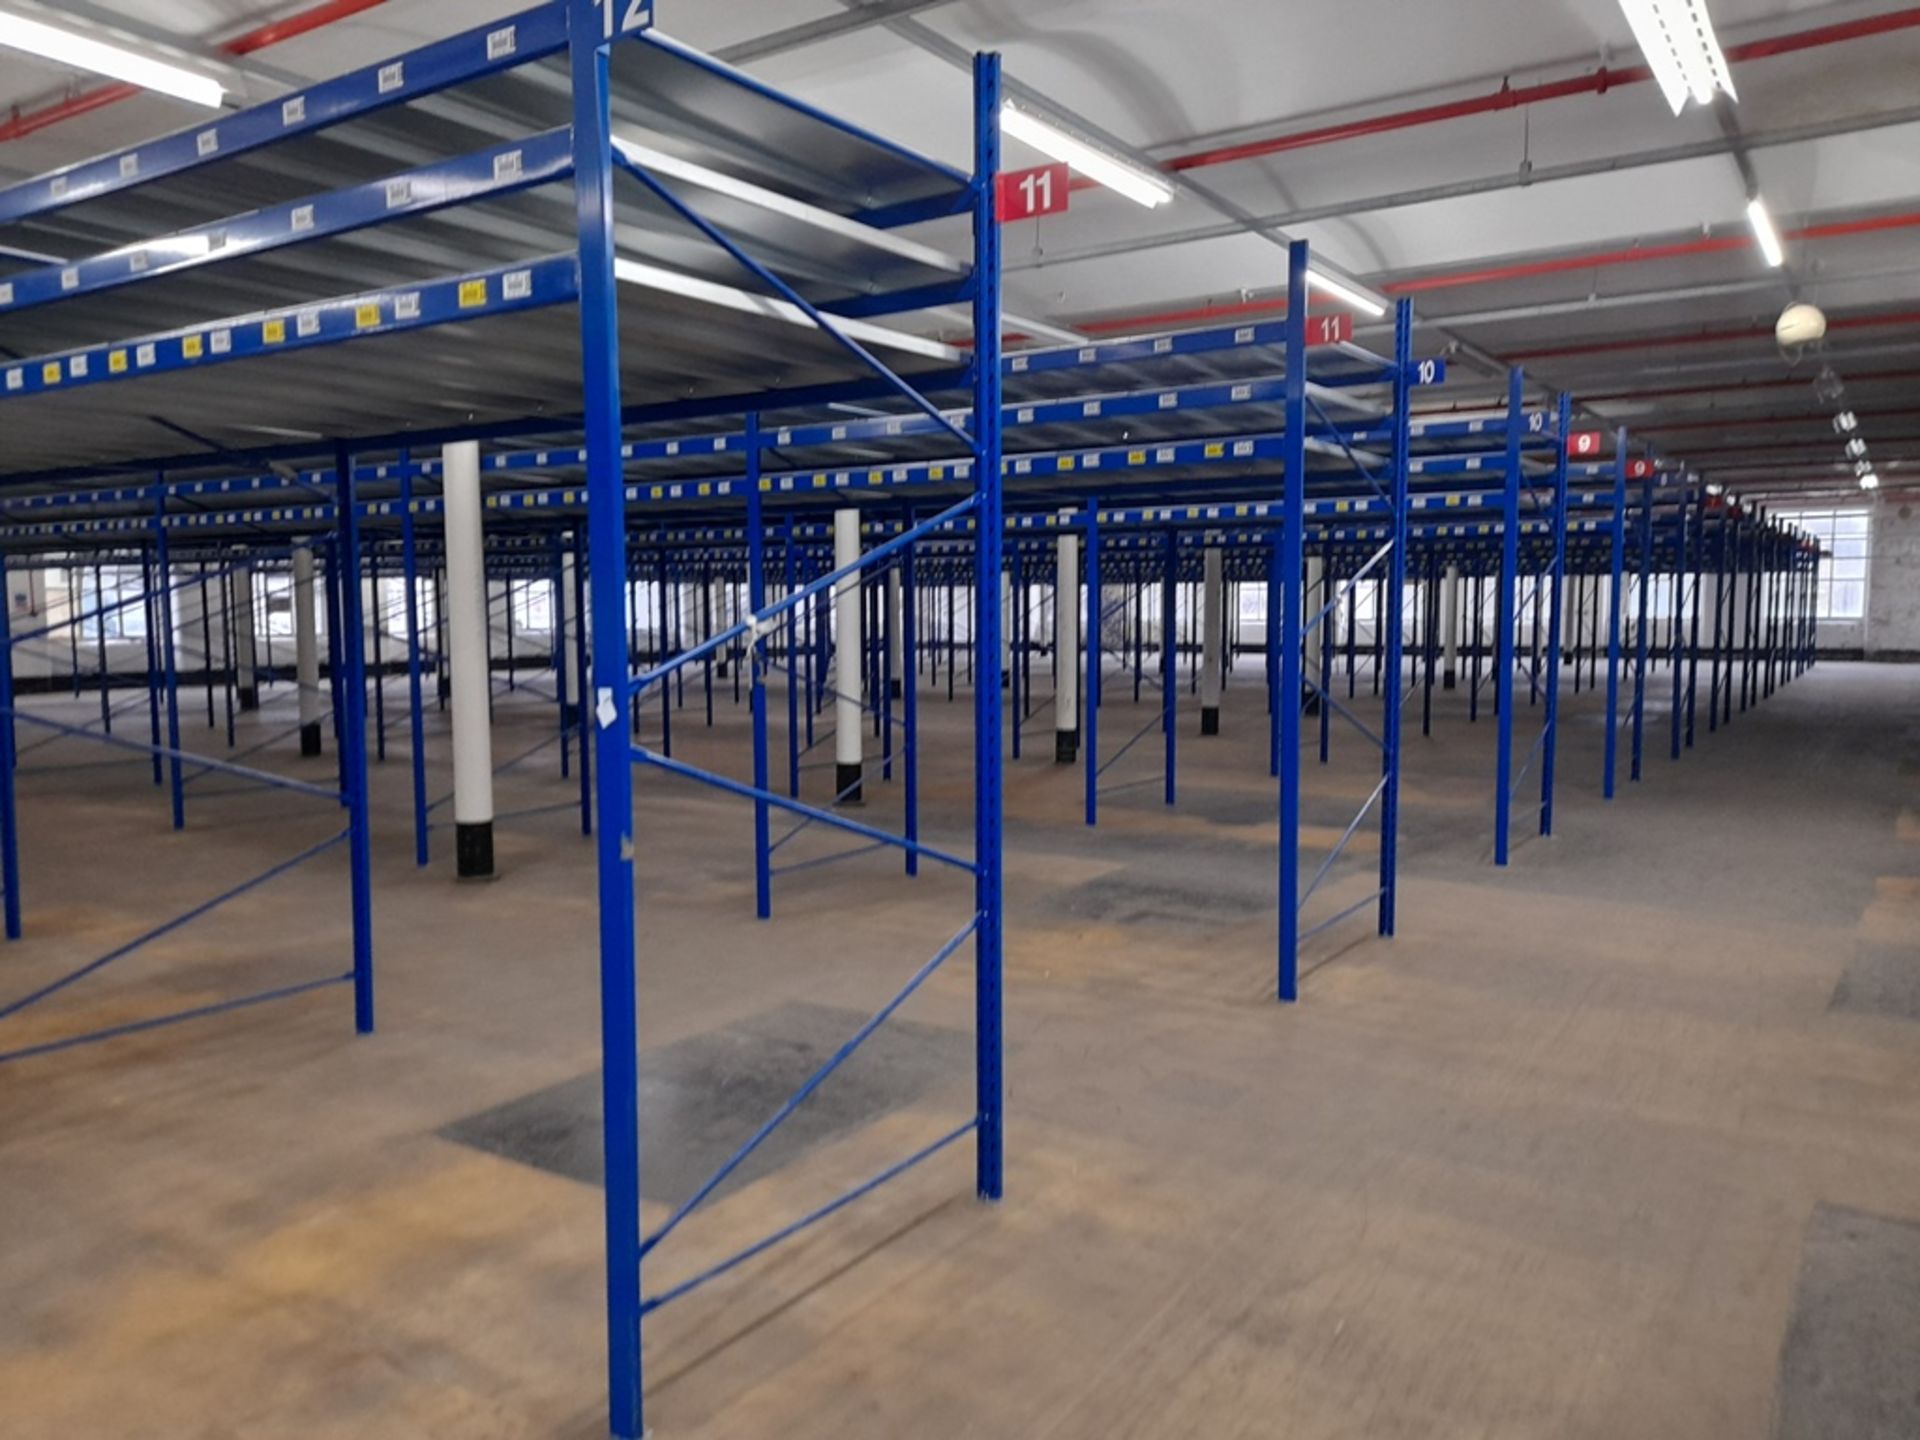 Medium duty storage racking - 55 uprights, with 145 pairs of beams and approx. 1,160 metal shelf - Image 7 of 13